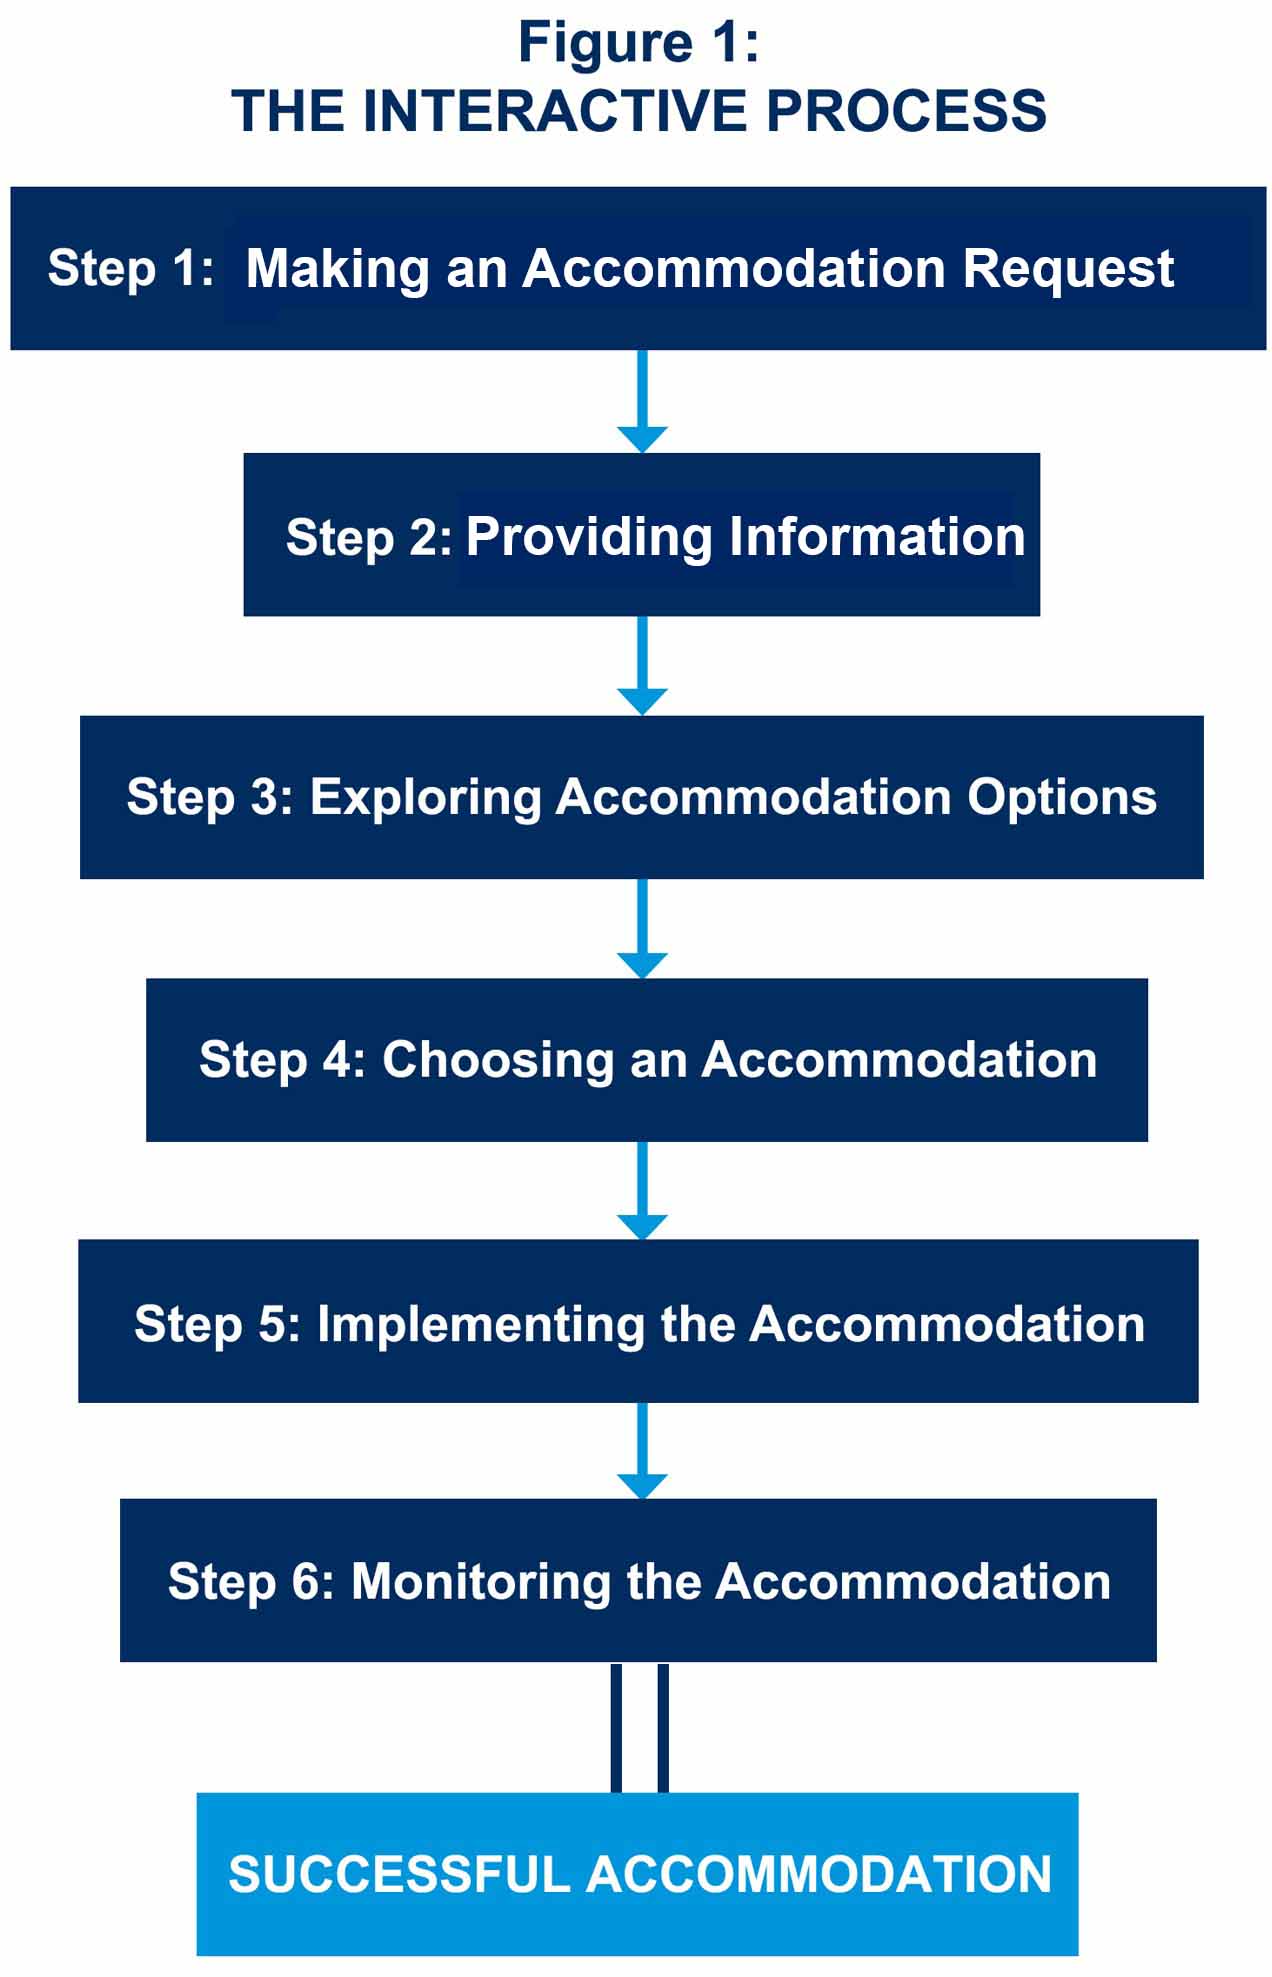 THE INTERACTIVE PROCESS AND SERVICE PROVIDERS EFFECTIVE ACCOMMODATION PRACTICES